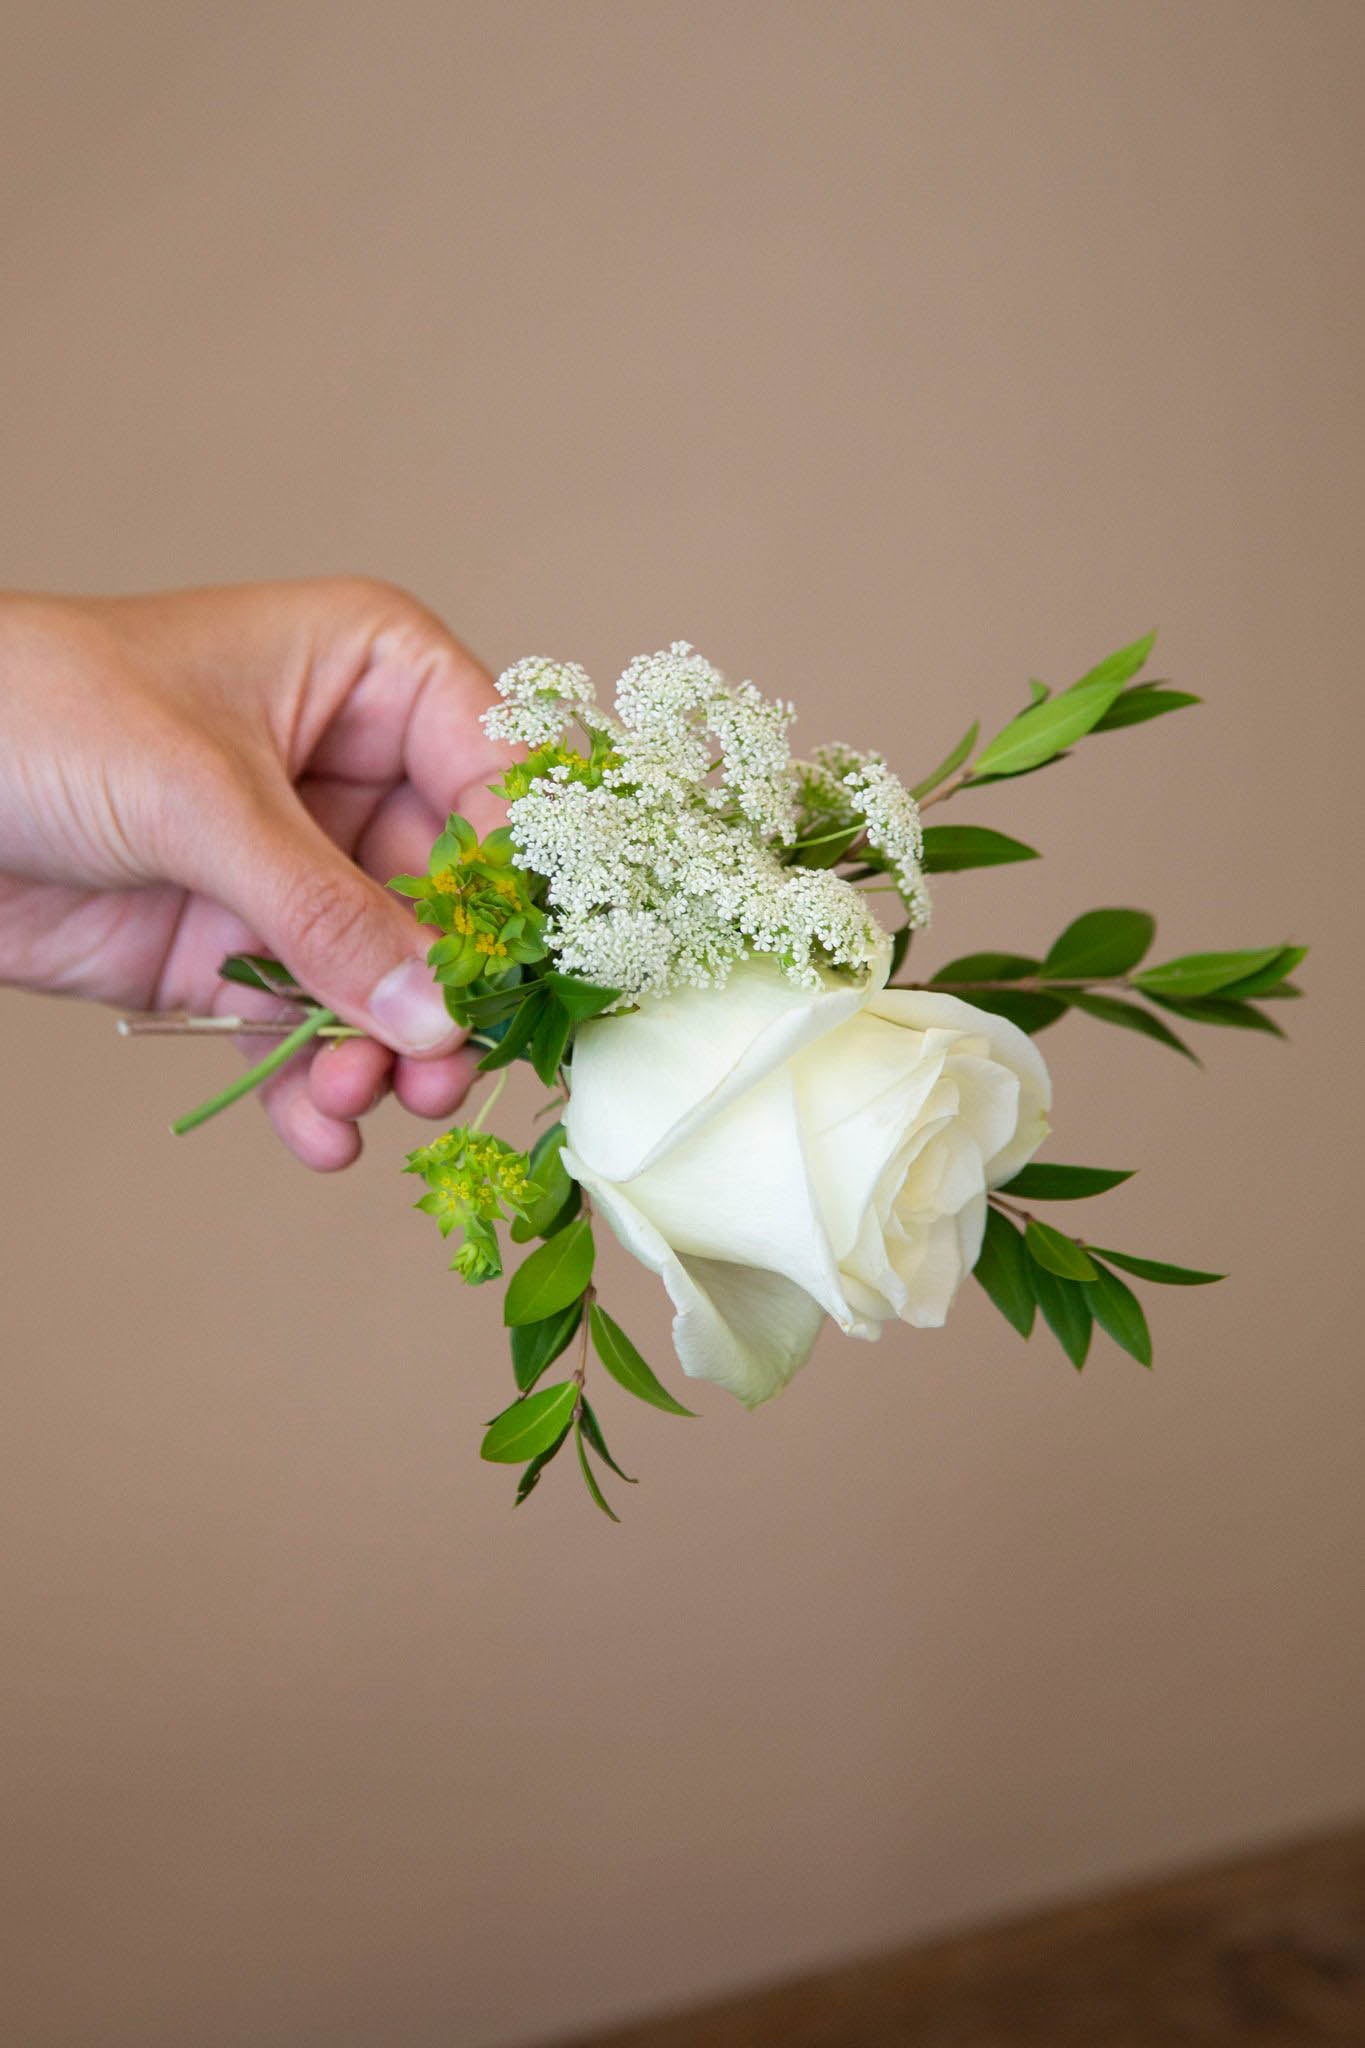 Add filler flower to your boutonniere design